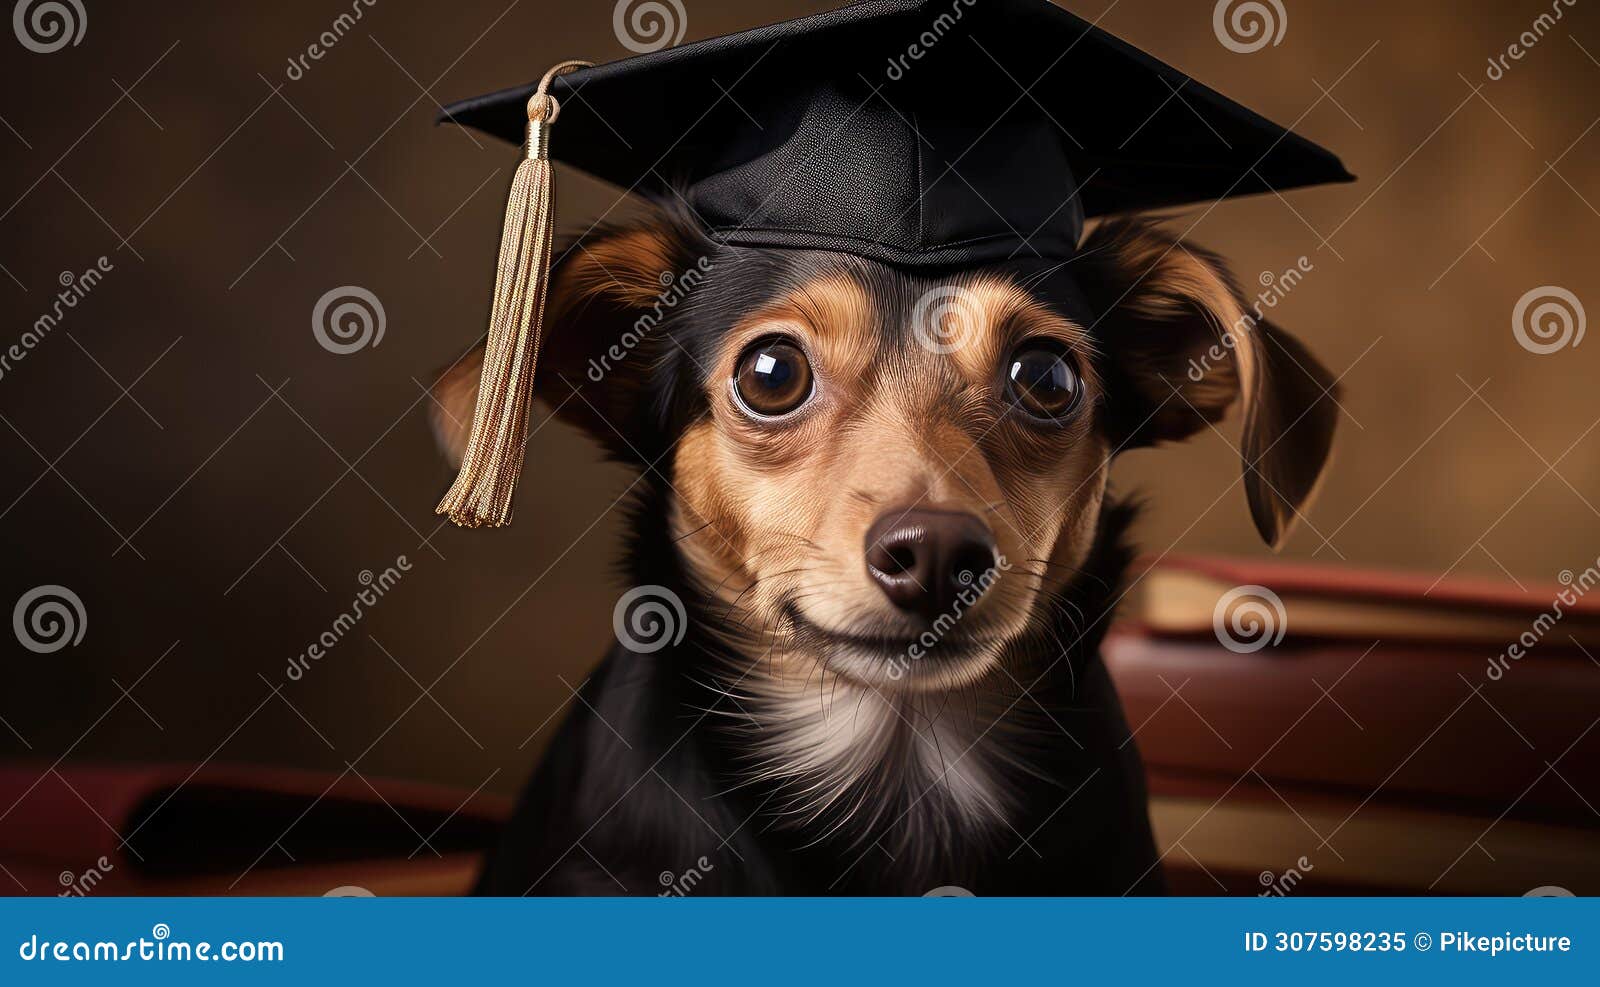 8 Dogs and Cats Who Know All About Graduation - Vetstreet | Vetstreet